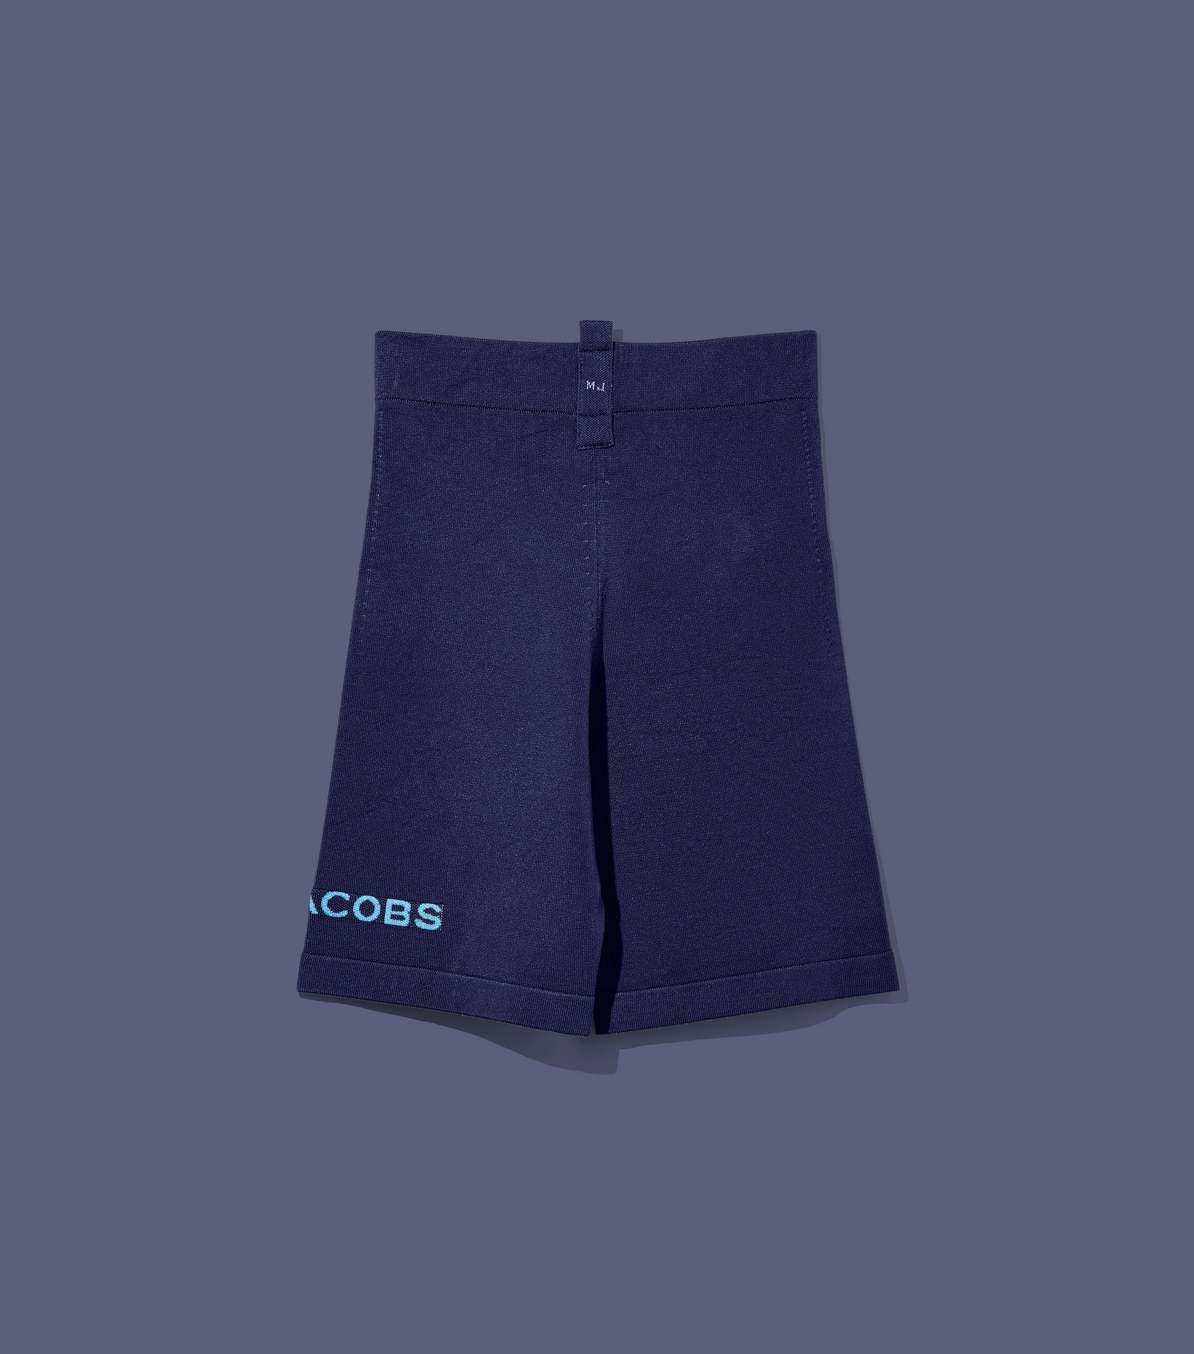 THE SPORT SHORTS - 7